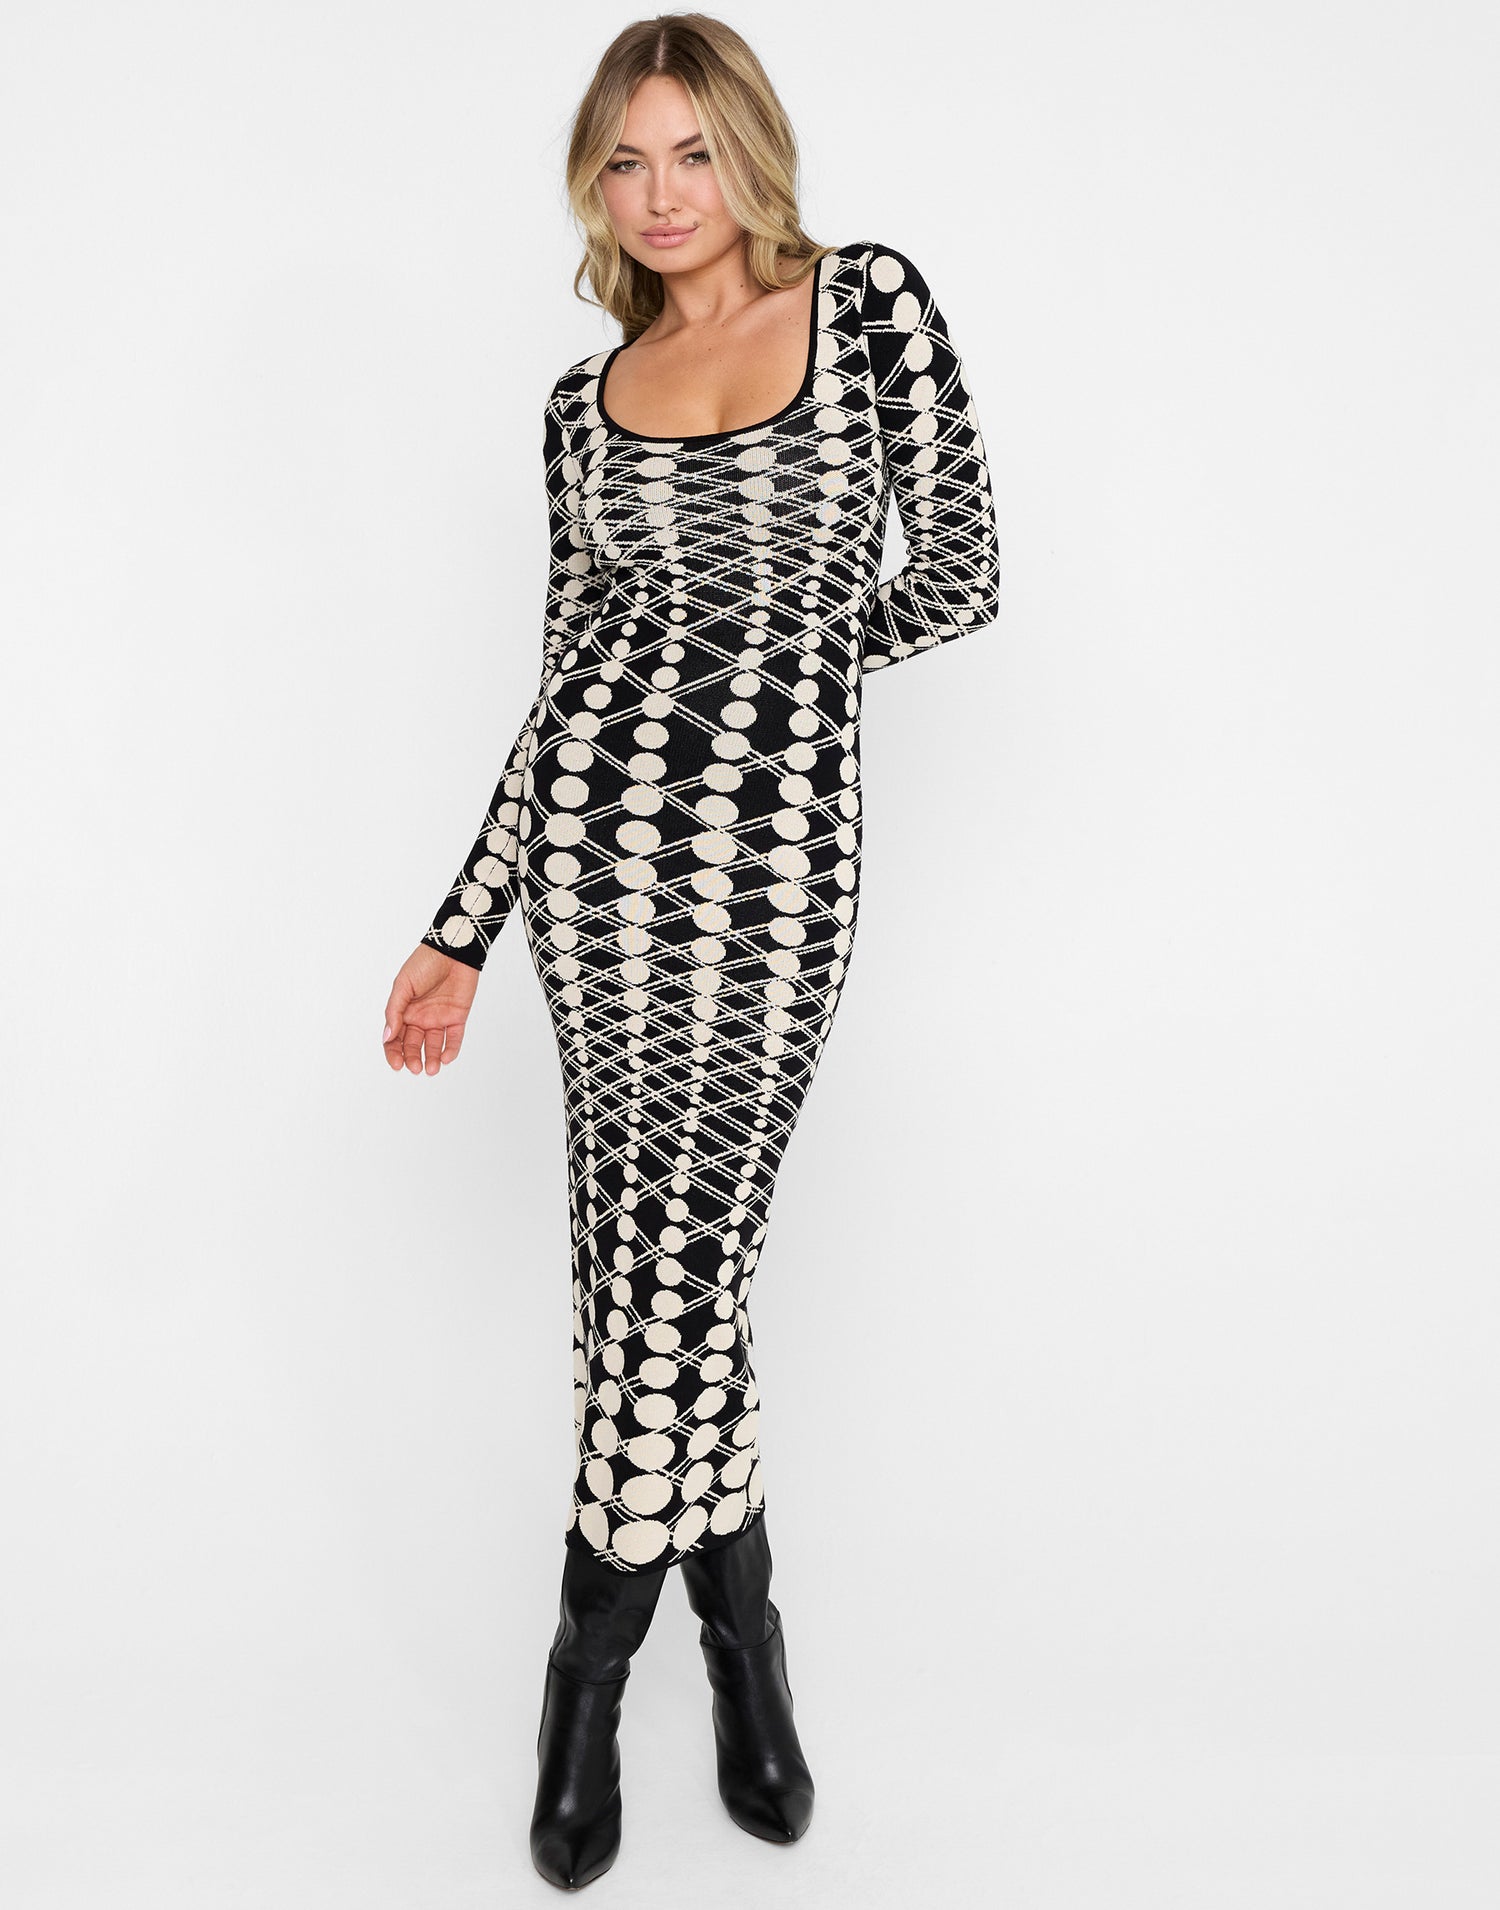 Quincy Midi Dress by Summer Haus in Black/Cream - Front View